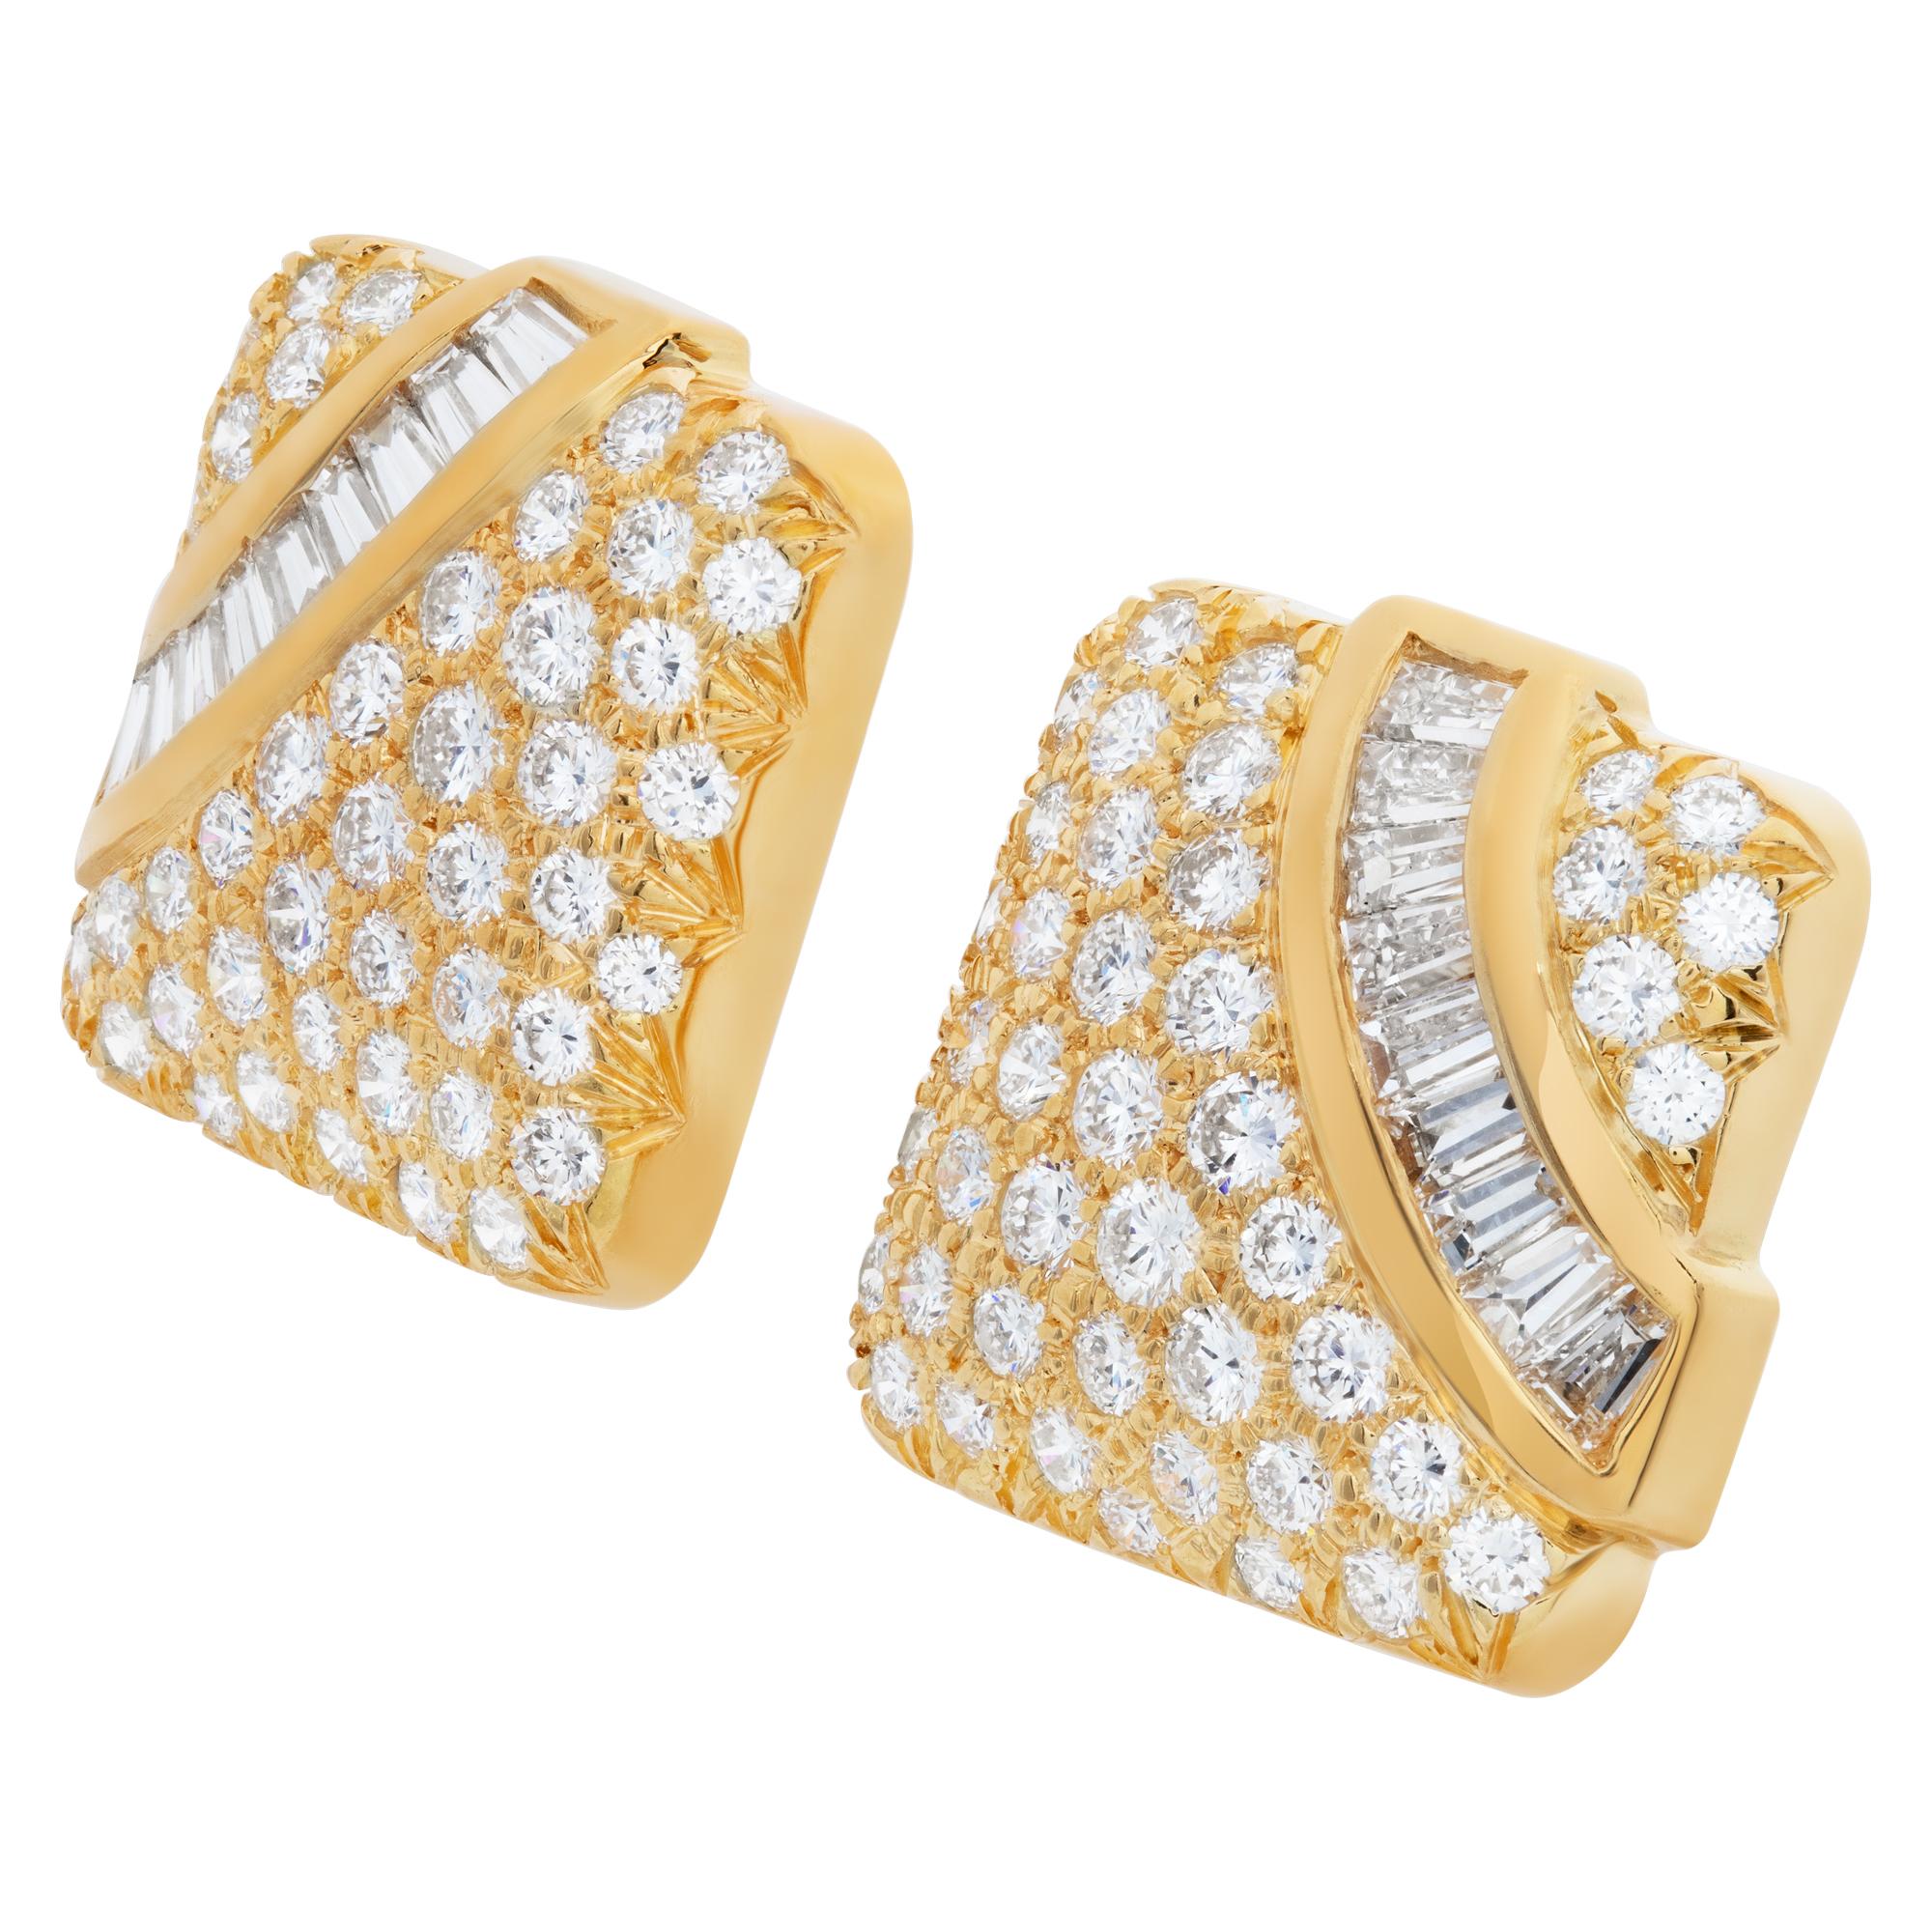 Square diamond clip on earrings in 18k with approximately over 5 carats in F-G color, VVS-VS clarity round diamonds and over 1 carat in baguette F-G color, VVS-VS clarity diamonds. Length 0.80 inches.
